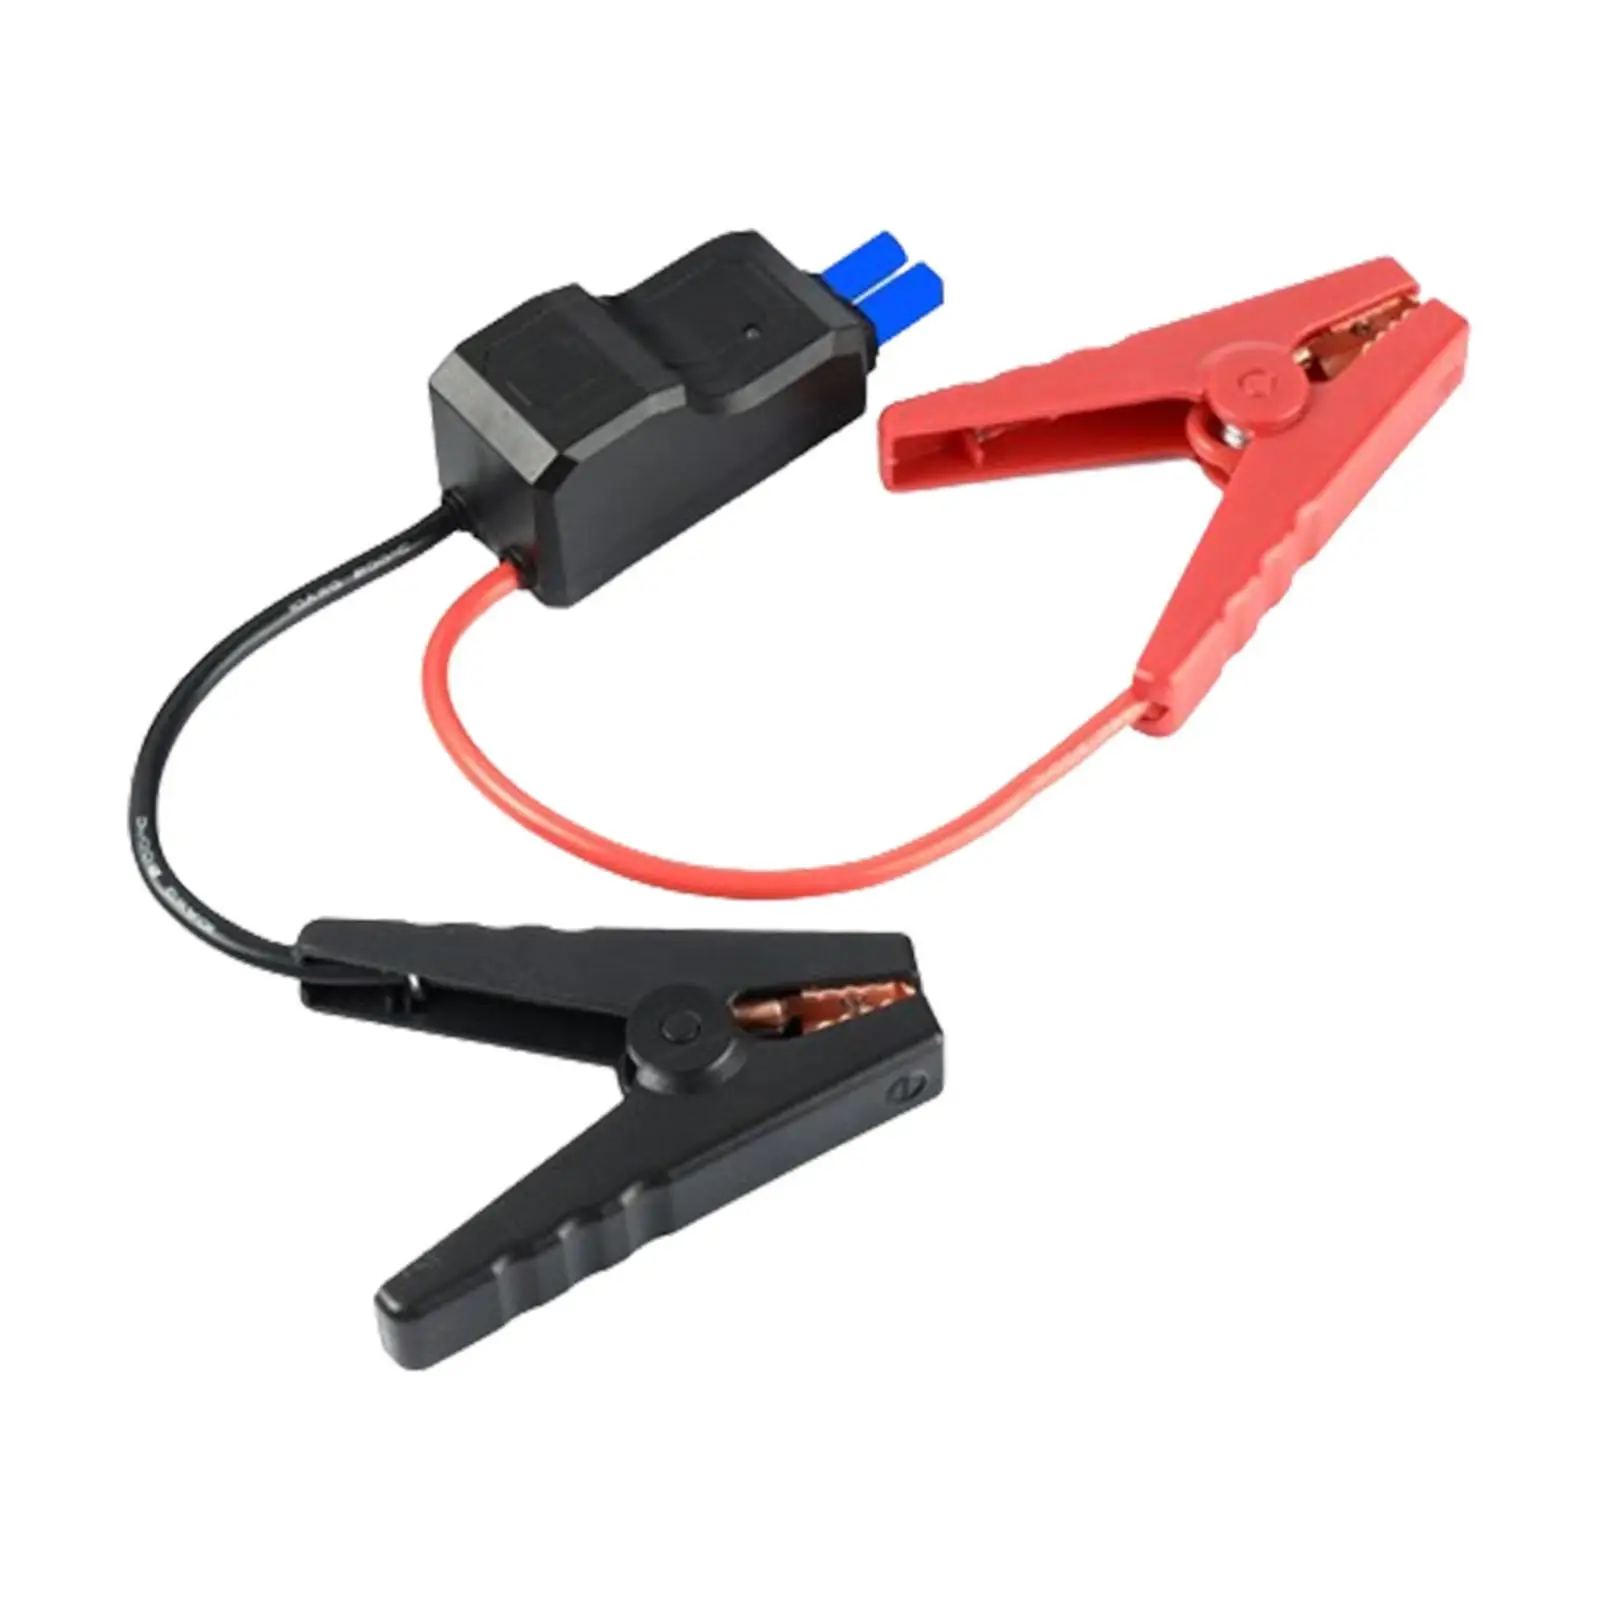 Generic Car Jump Starter Professional Emergency Automotive Replacement Booster